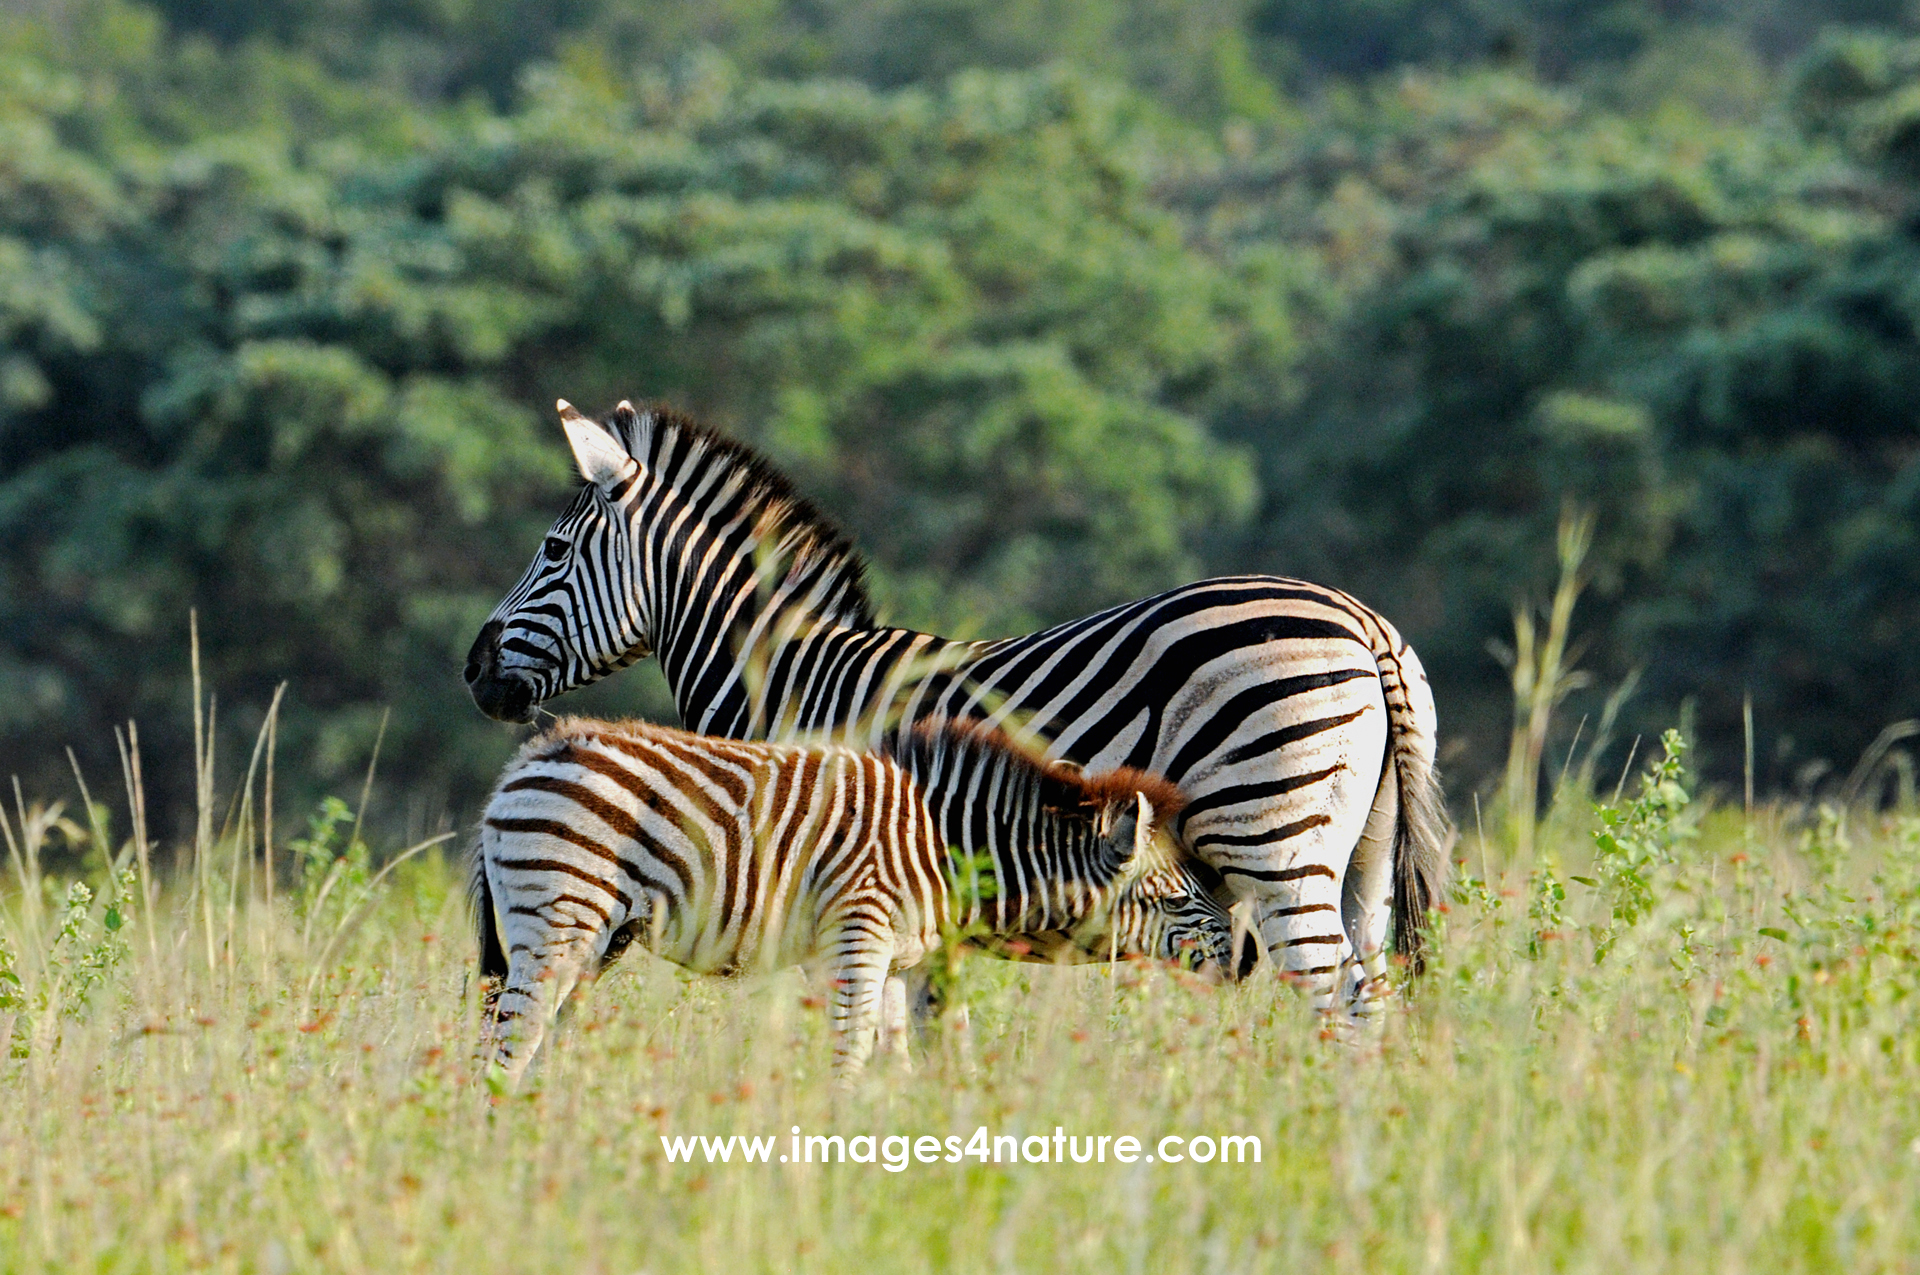 Zebra toddler trying to drink milk from its mother in high grass